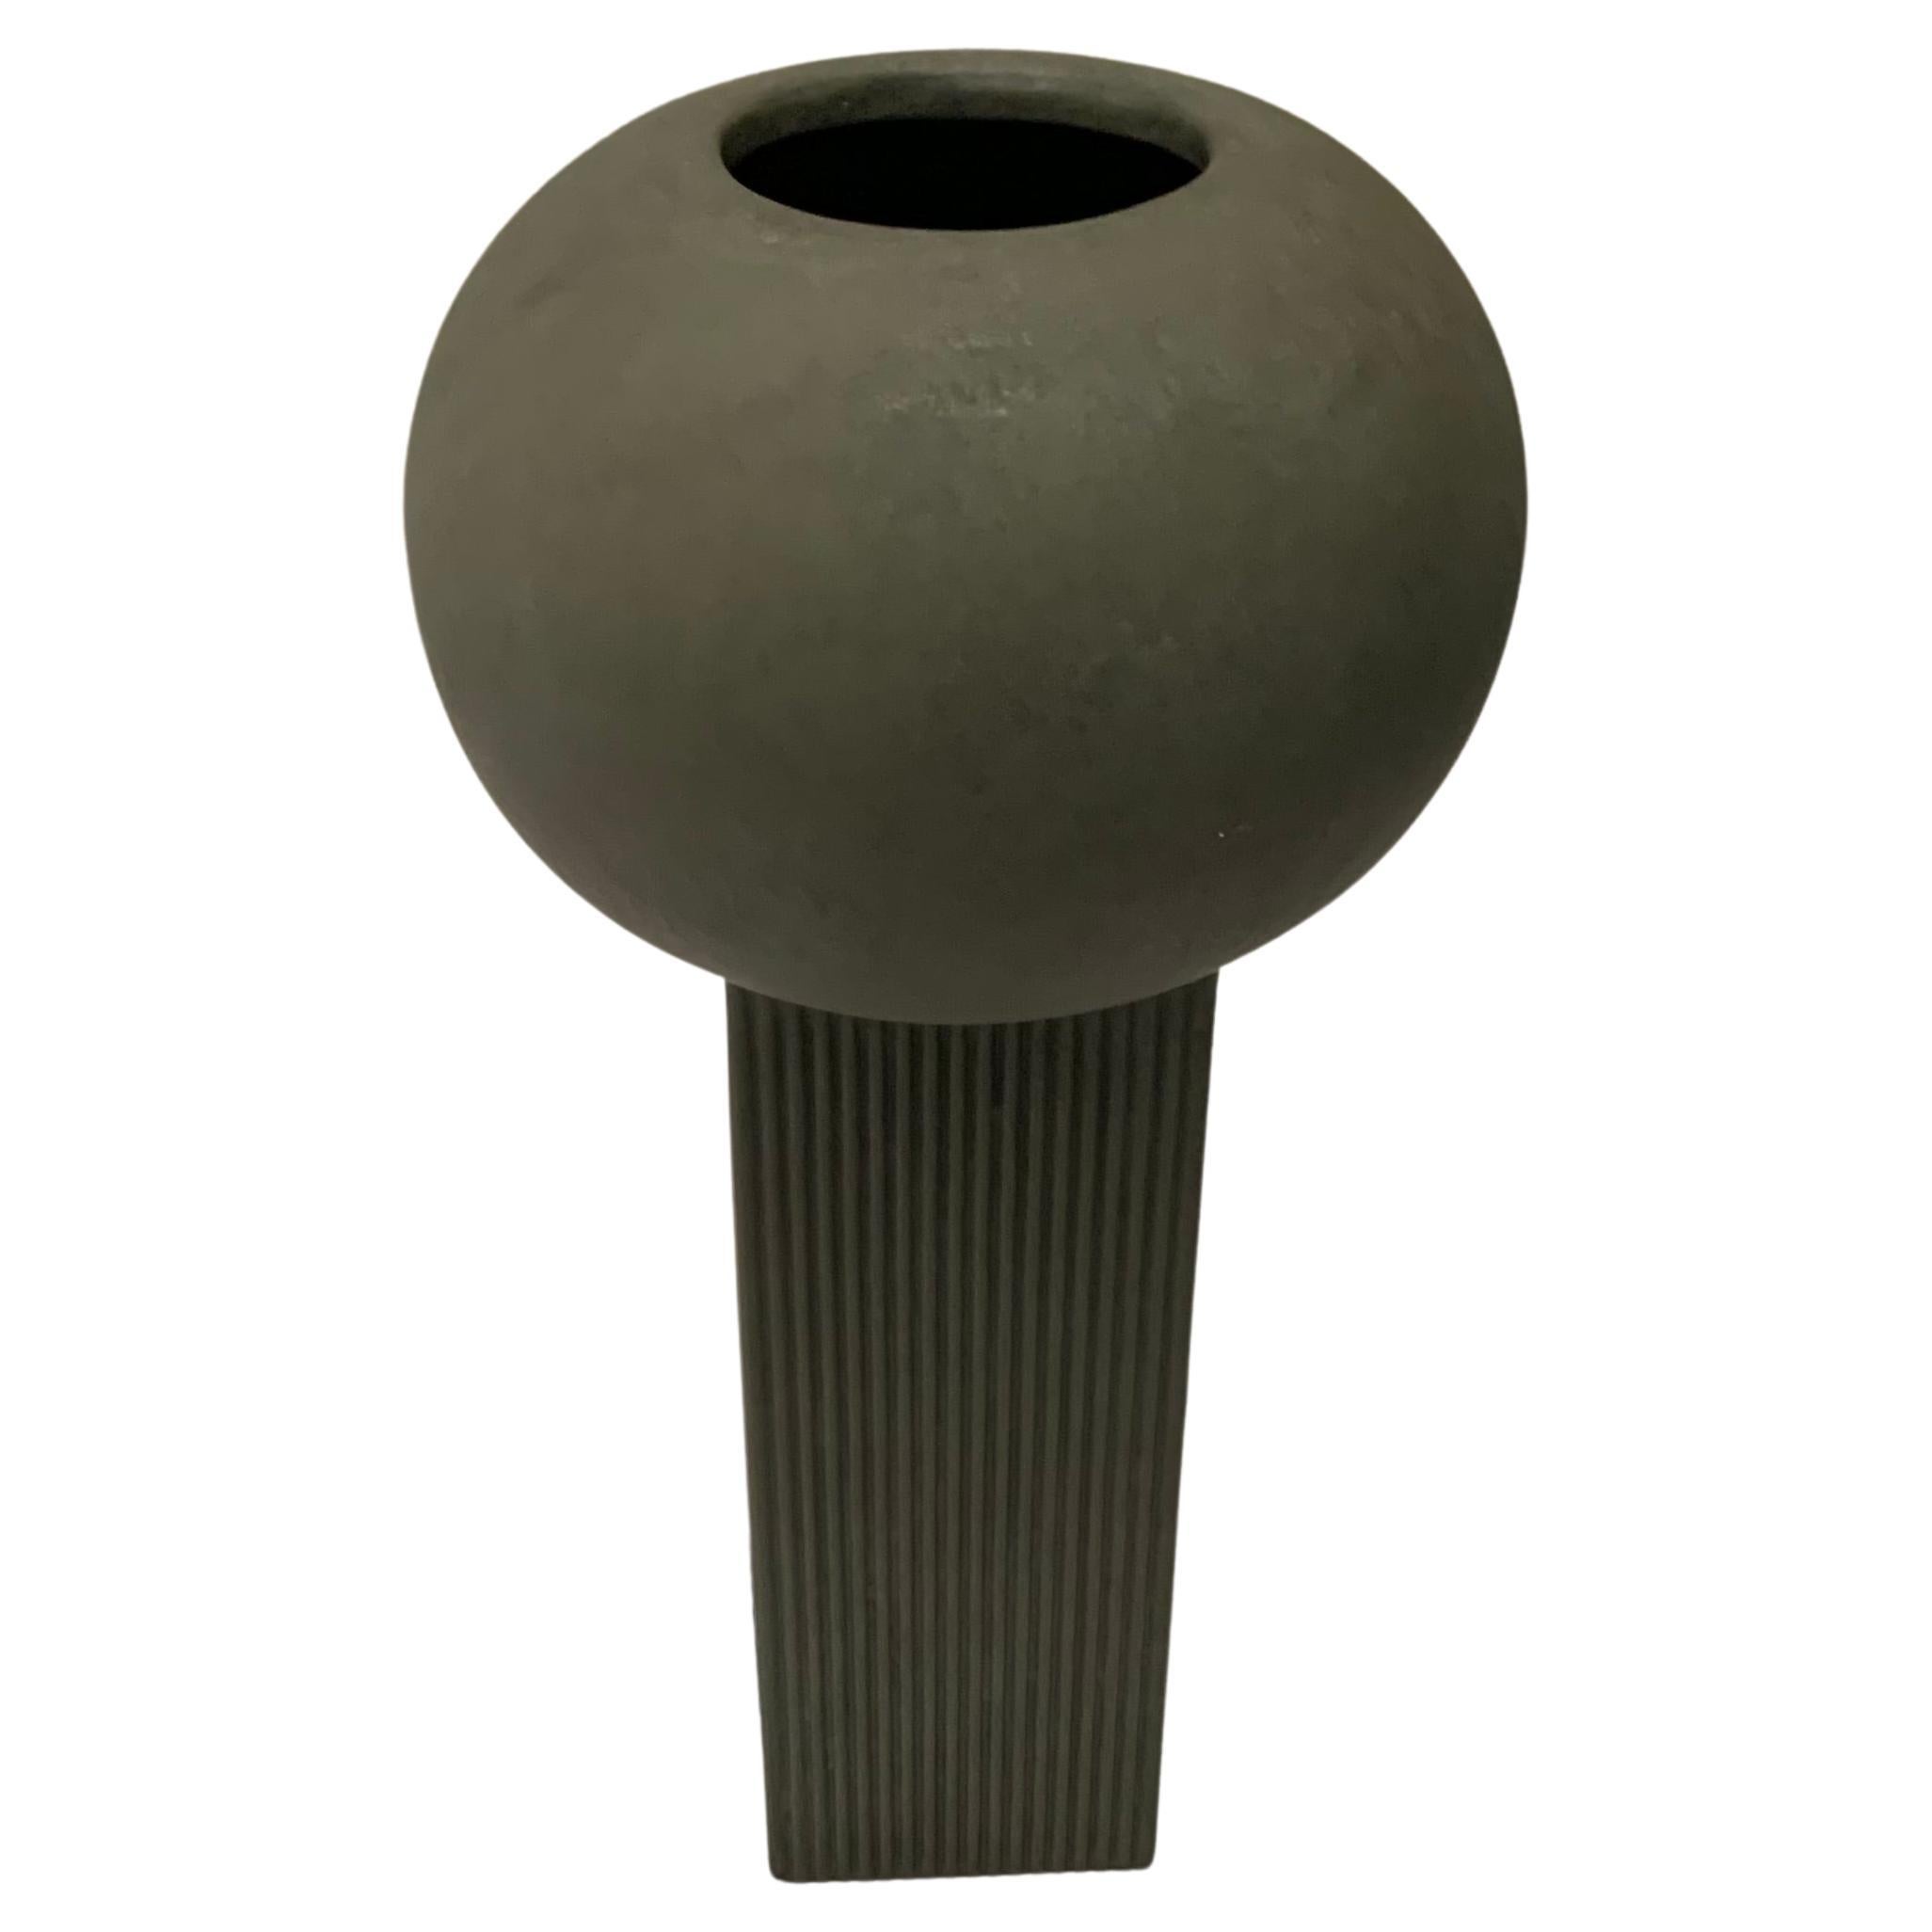 Contemporary Danish designed tall square shaped matte grey column with
globe top vase.
Also available in smaller size ( S6288 )
One of a large collection of Danish designed vases both in white and grey.